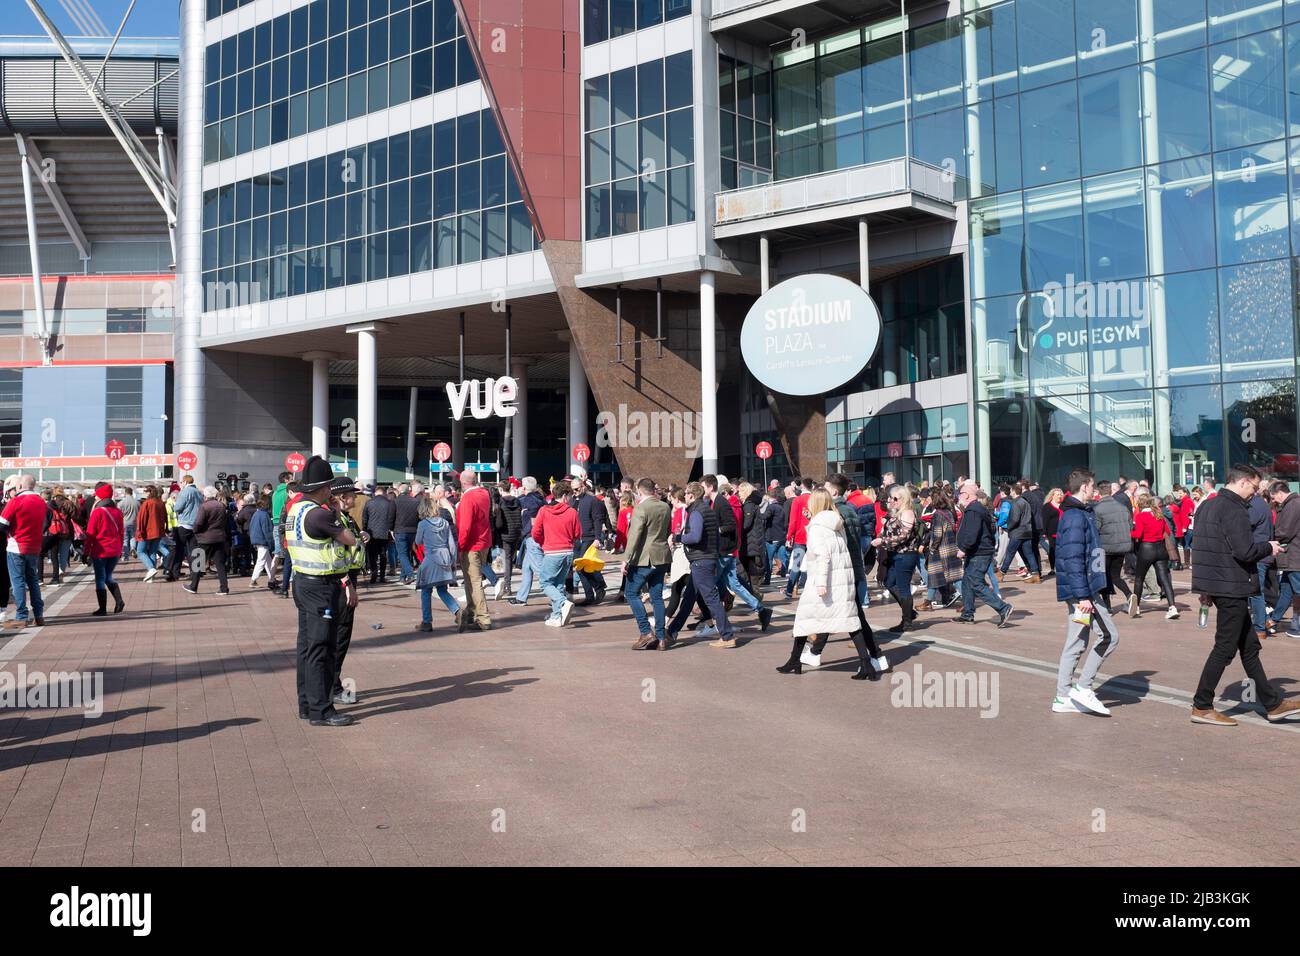 Policemen watch the crowds as they enter the Principality Stadium for an international rugby match in Cardiff South Wales Stock Photo